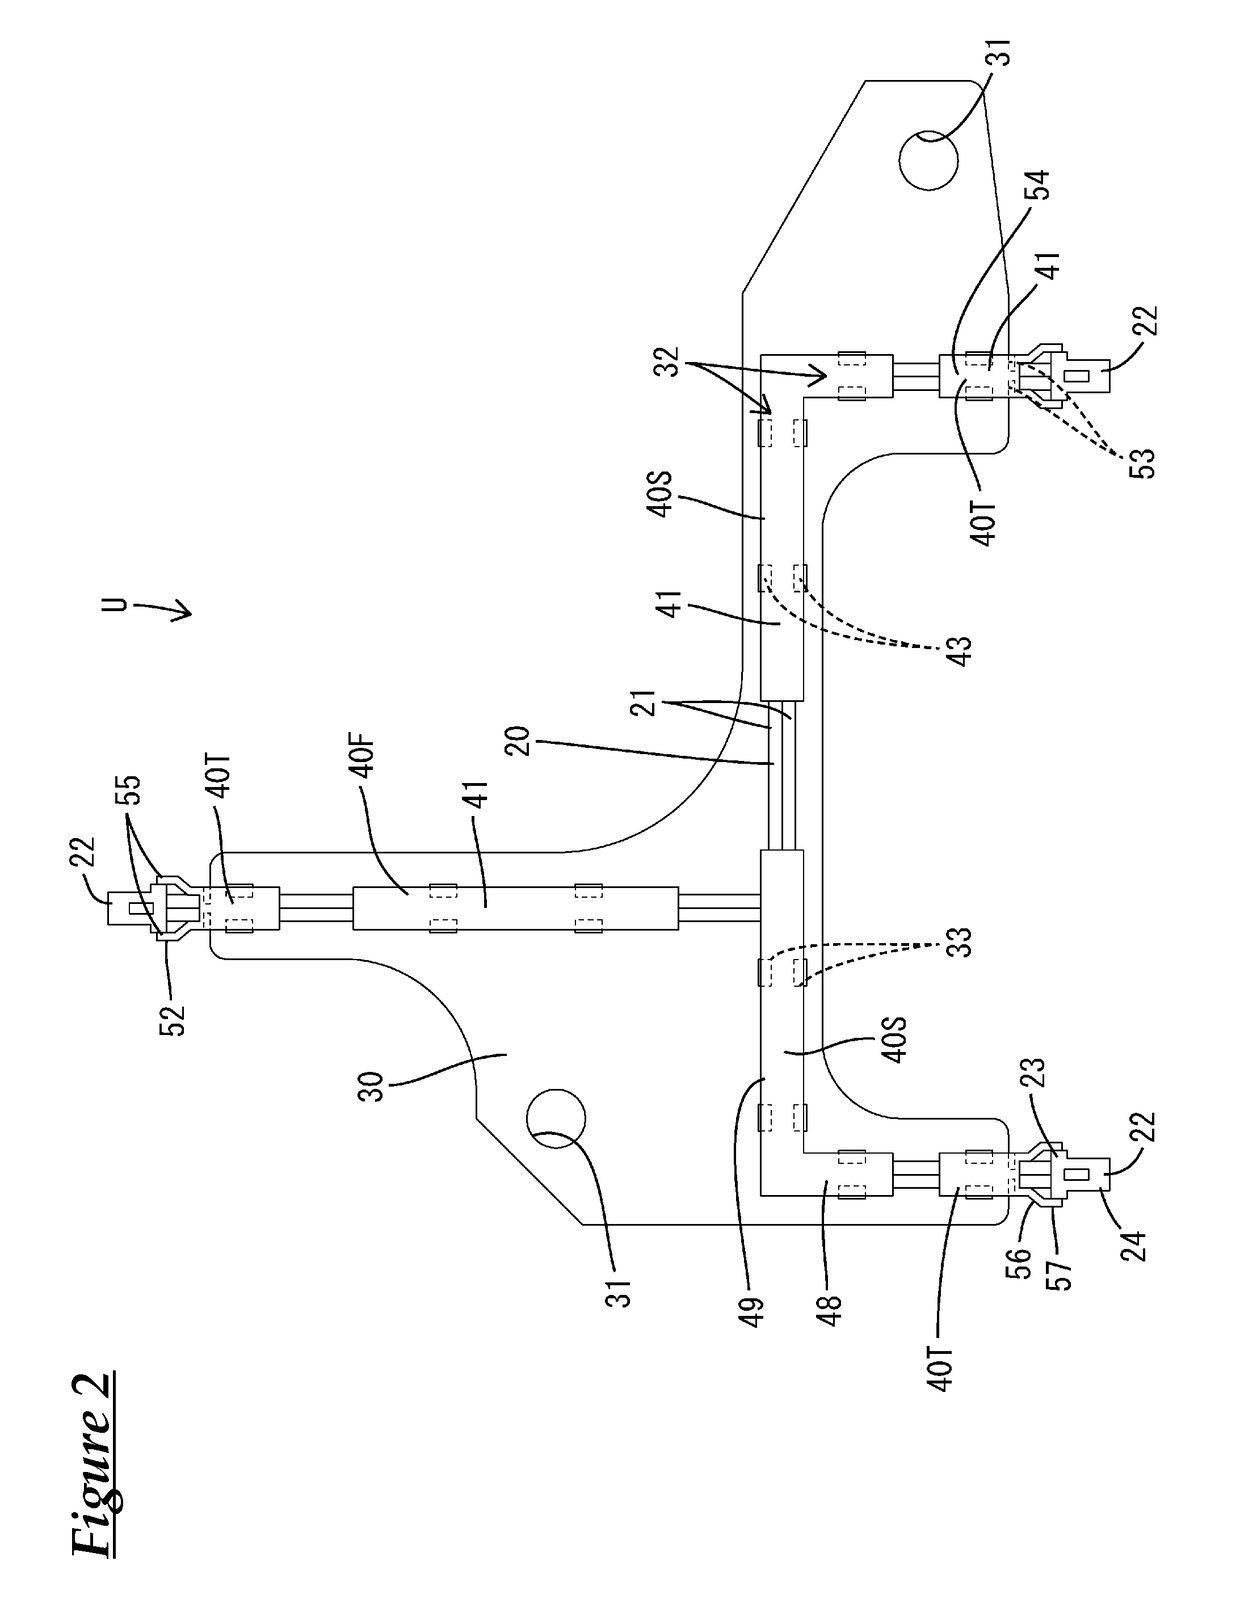 Wire harness attachment structure and wiring unit